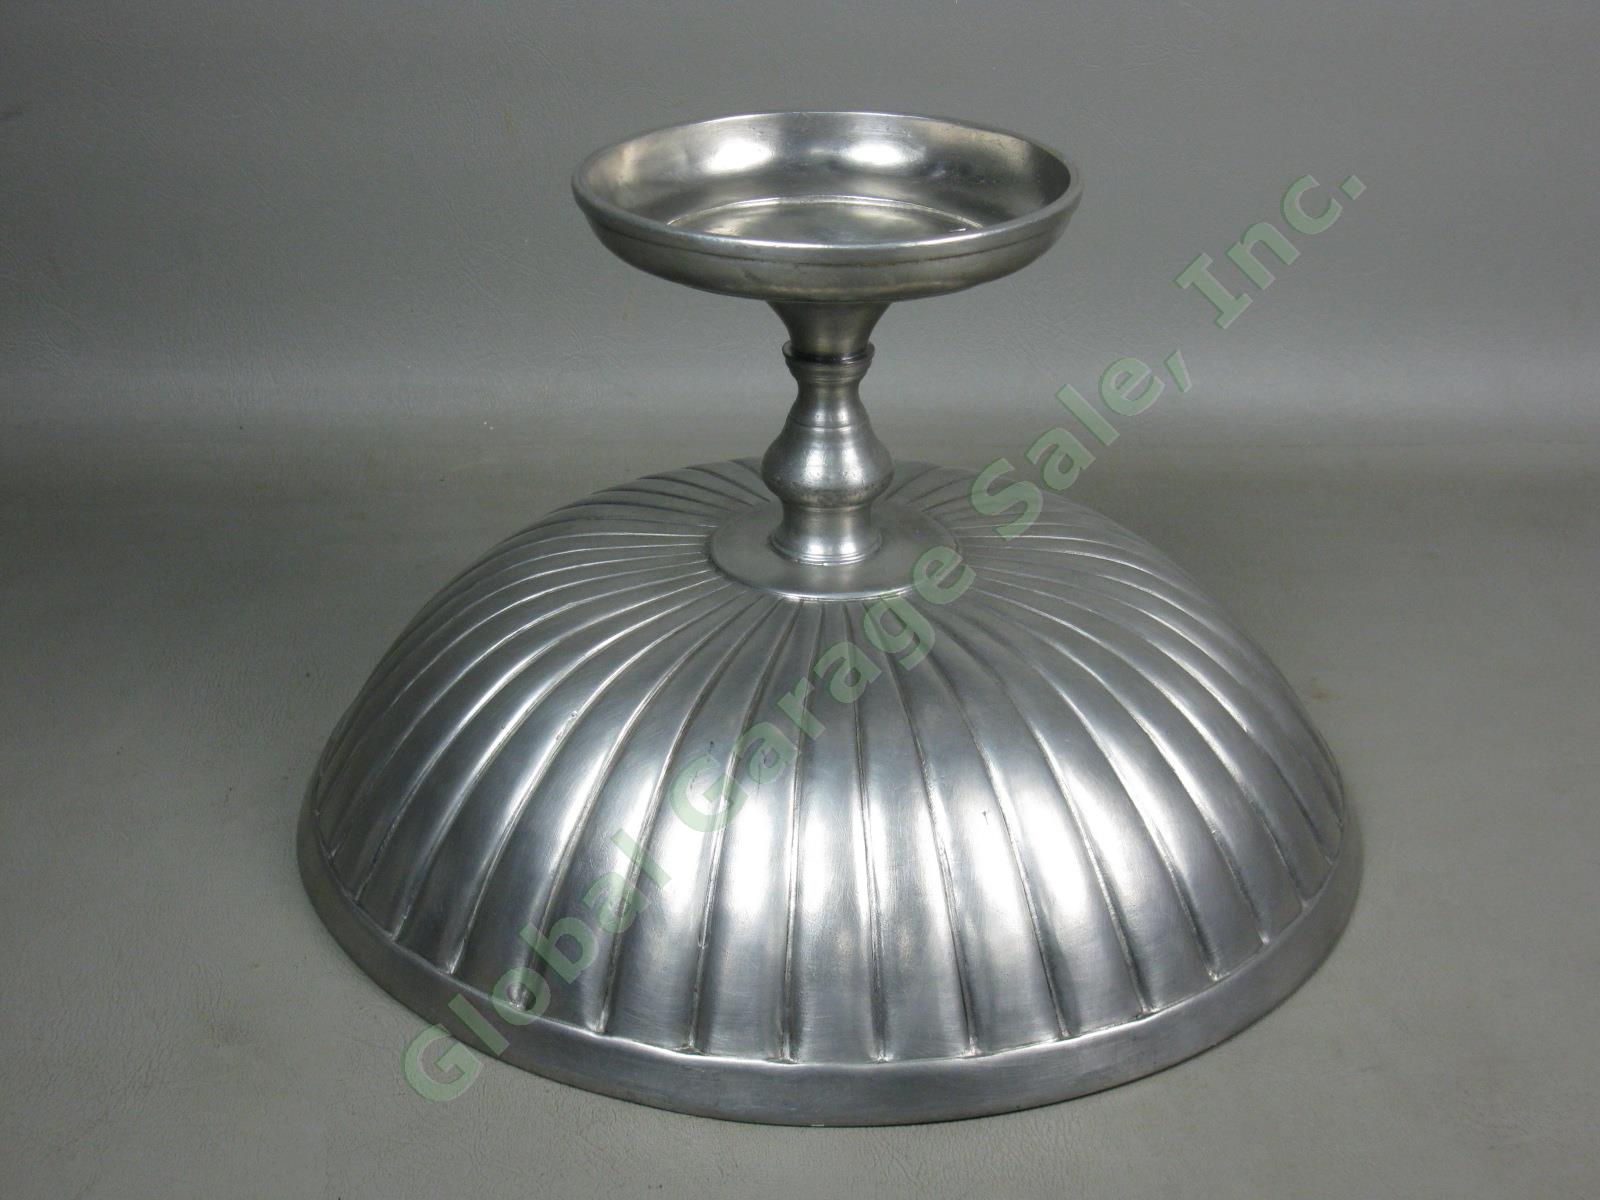 NEW Match Pewter 12" Wide Ribbed Footed Fruit Bowl Etain 95% Made In Italy NR! 2